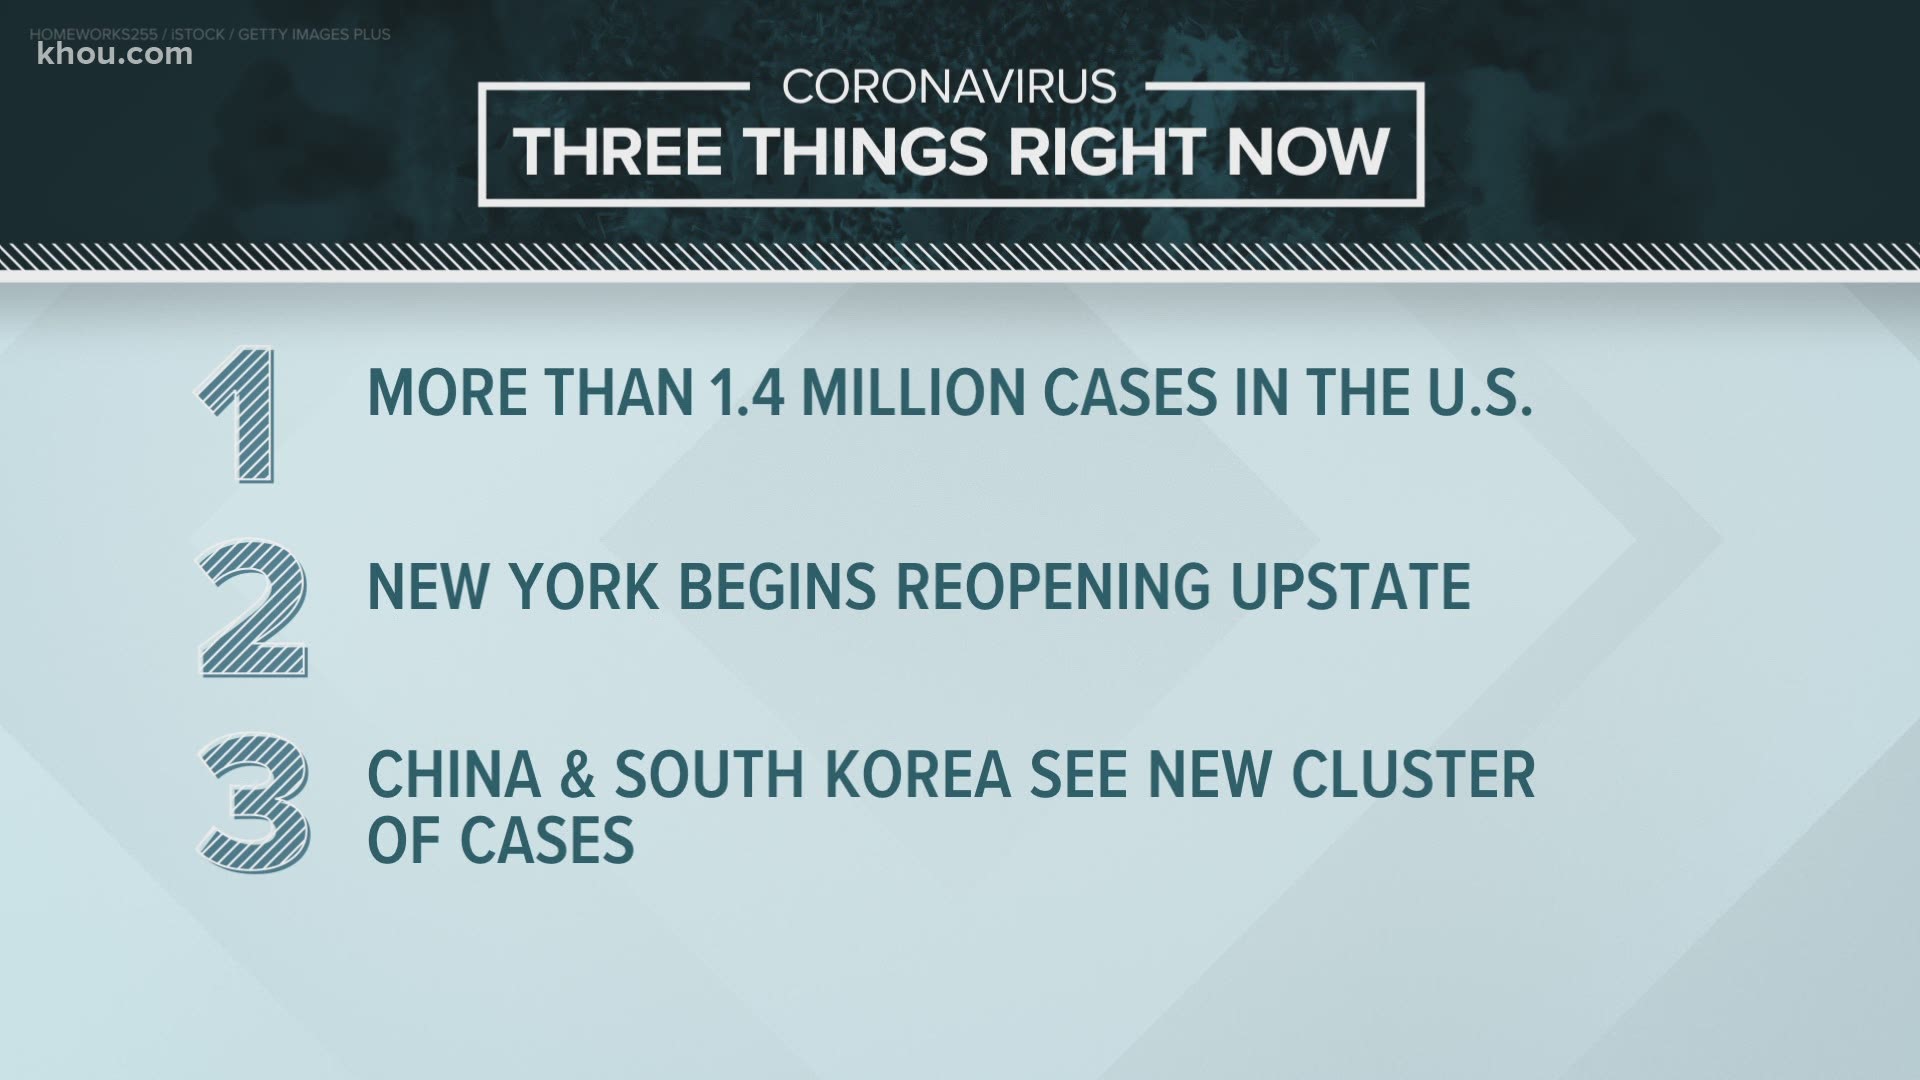 Here are you local and national coronavirus headlines including possible vaccines and what China is doing after a second cluster of new cases.